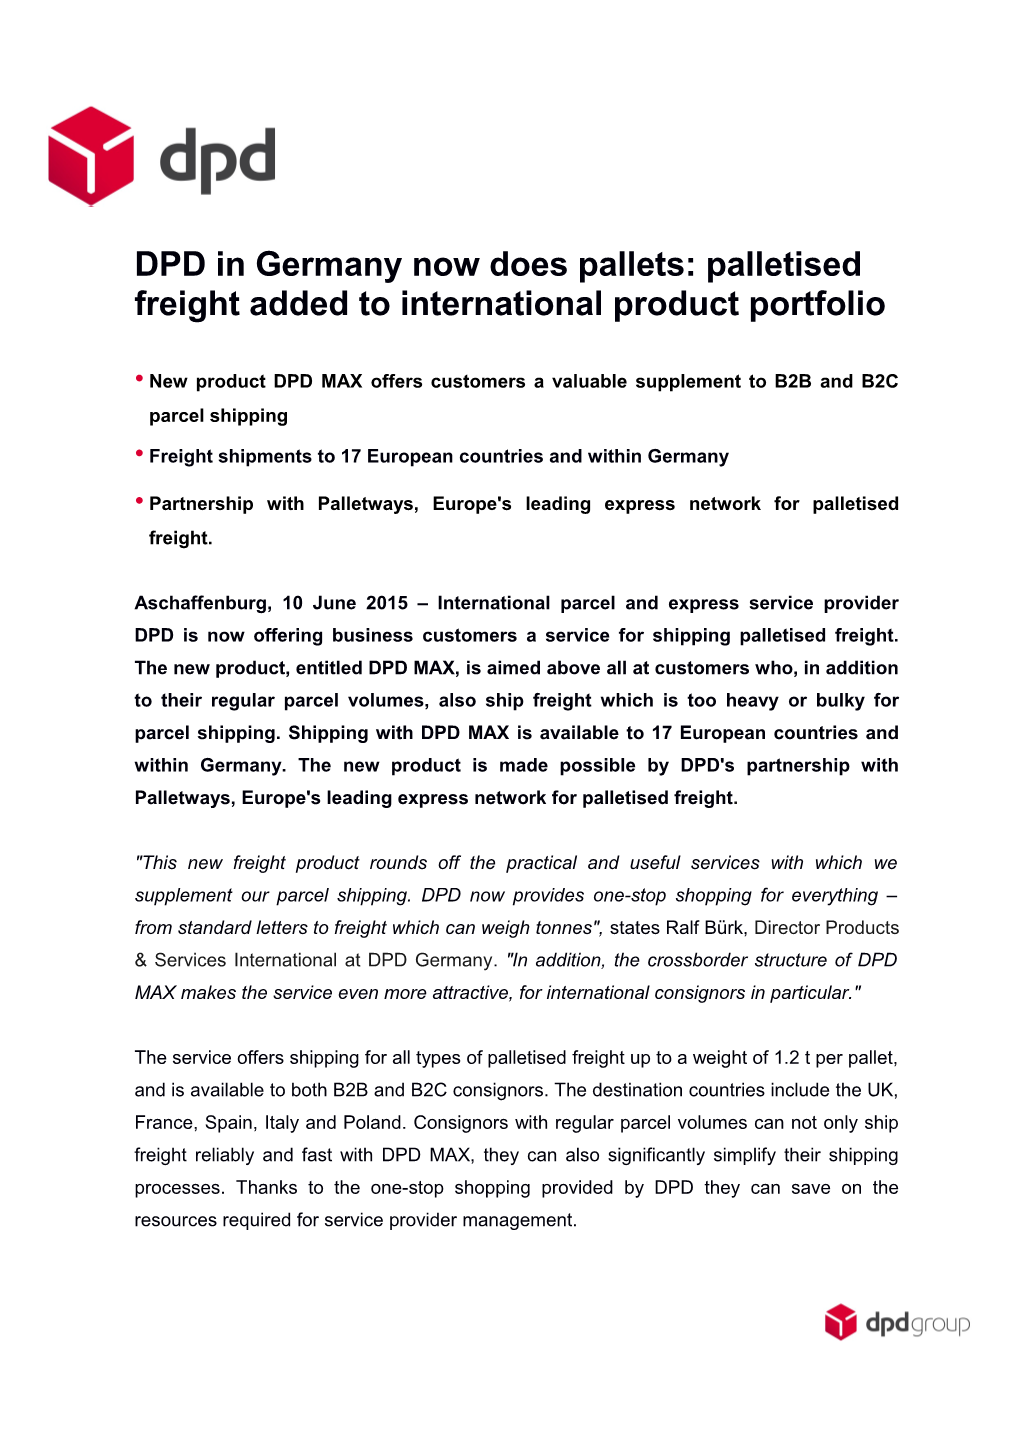 DPD in Germany Now Does Pallets: Palletised Freight Added to International Product Portfolio